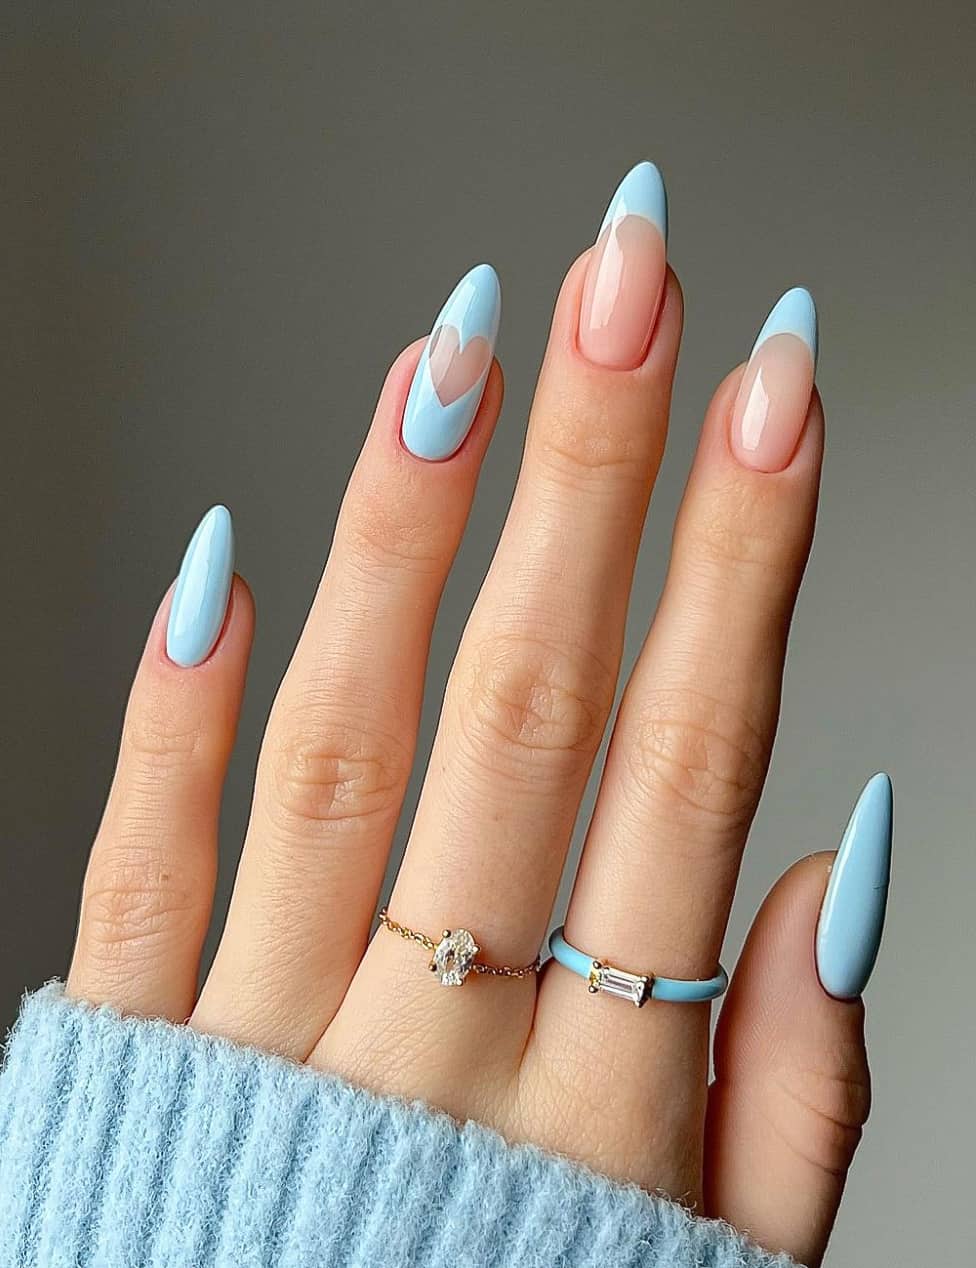 A hand with medium length almond nails with baby blue nail polish and multiple designs including French tips, solid-colored nails, and a solid nail with a negative space heart